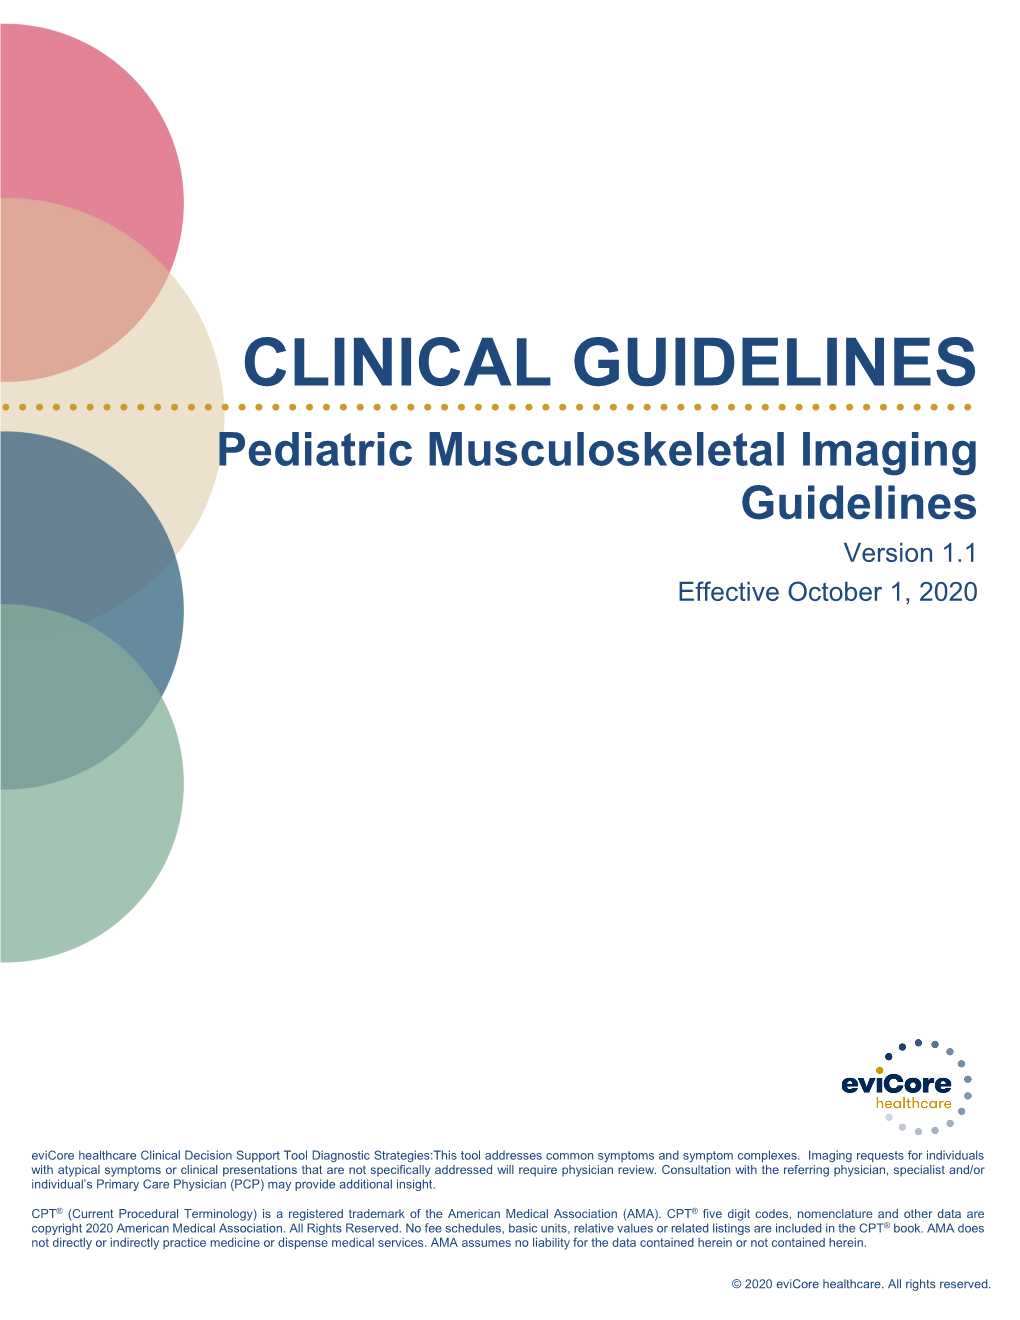 Evicore Pediatric Musculoskeletal Imaging Guidelines